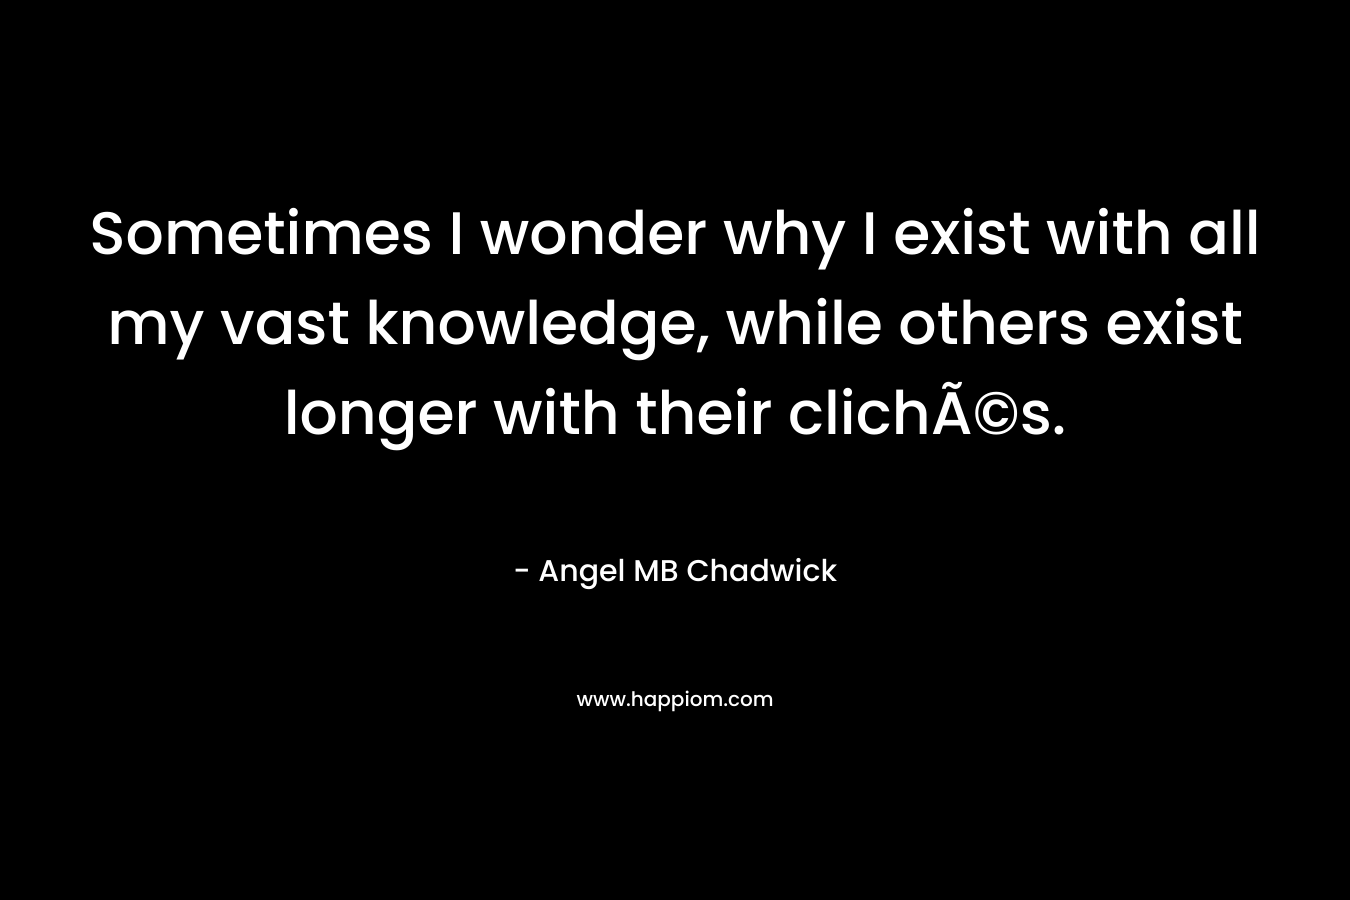 Sometimes I wonder why I exist with all my vast knowledge, while others exist longer with their clichÃ©s. – Angel MB Chadwick